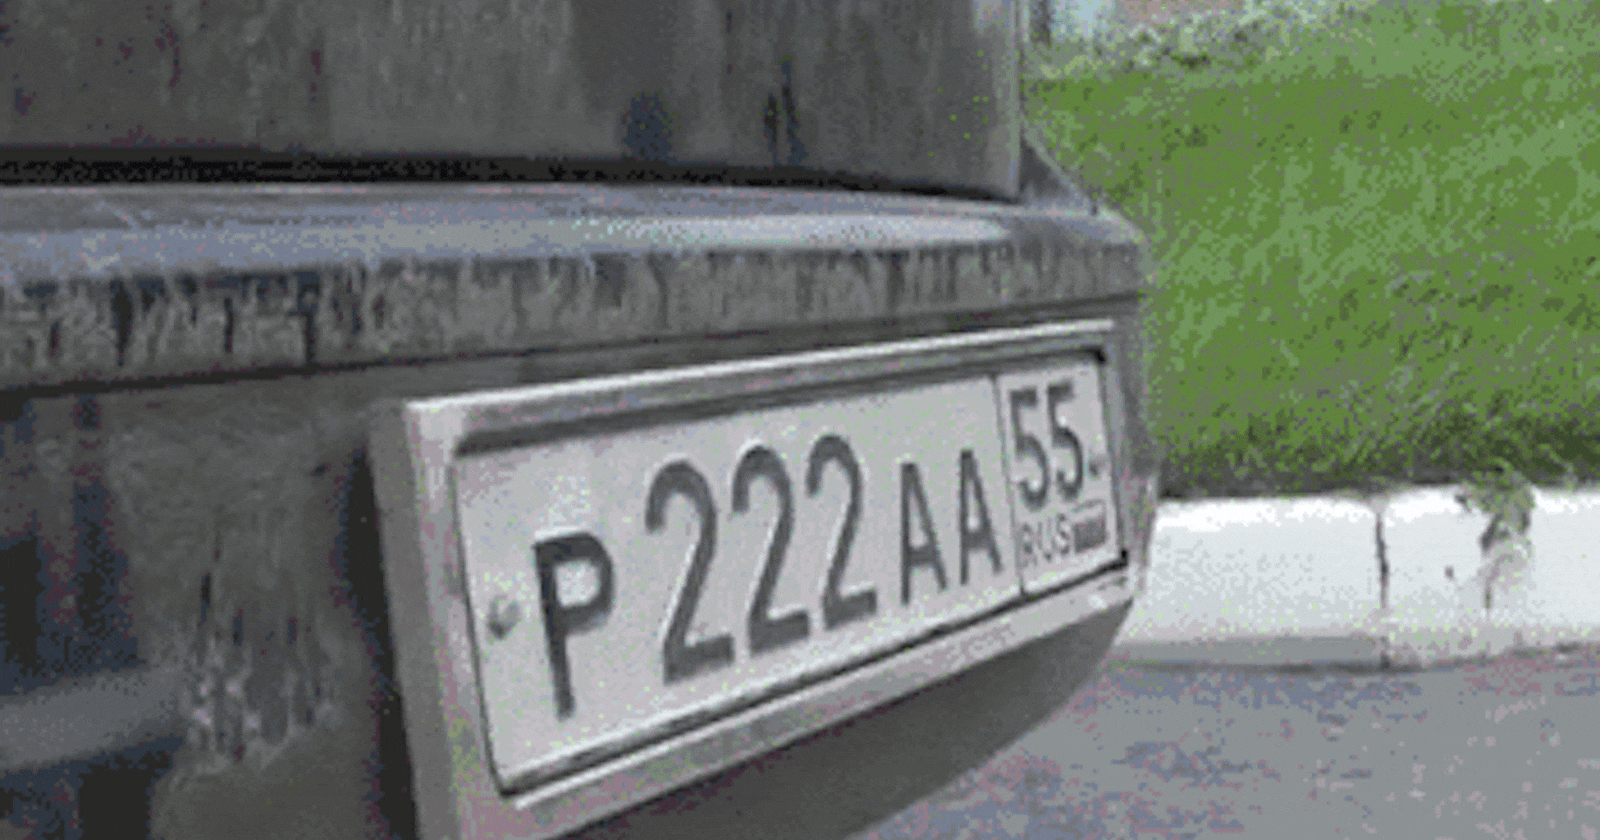 Car Number Plate Detection and Information Fetching System.